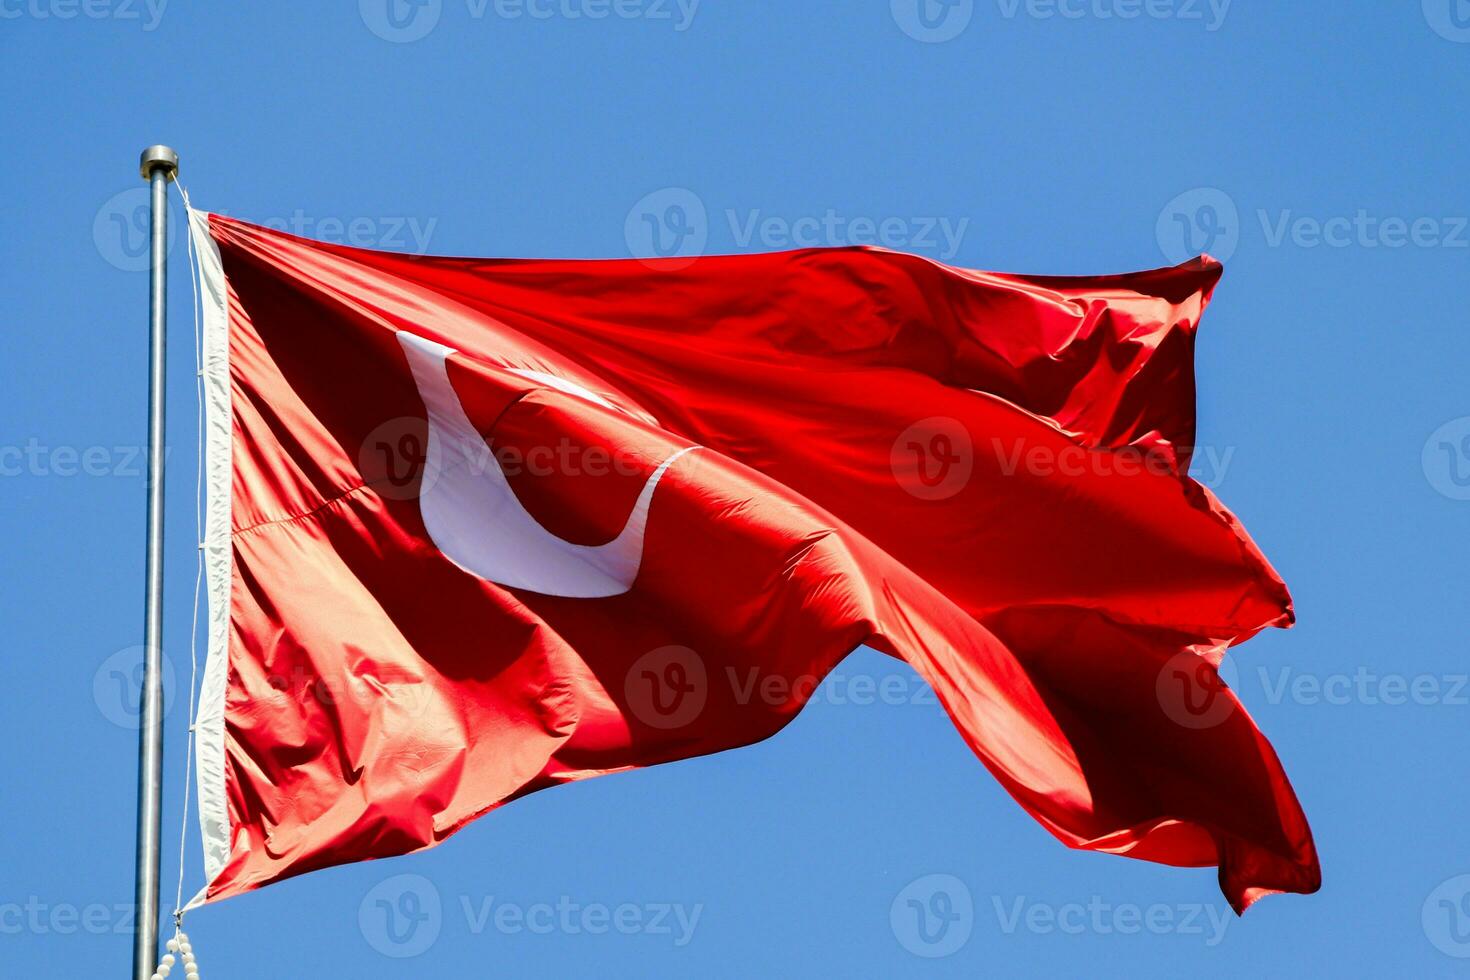 Waving Turkish flag. Sky background. Flag with star and crescent symbol photo